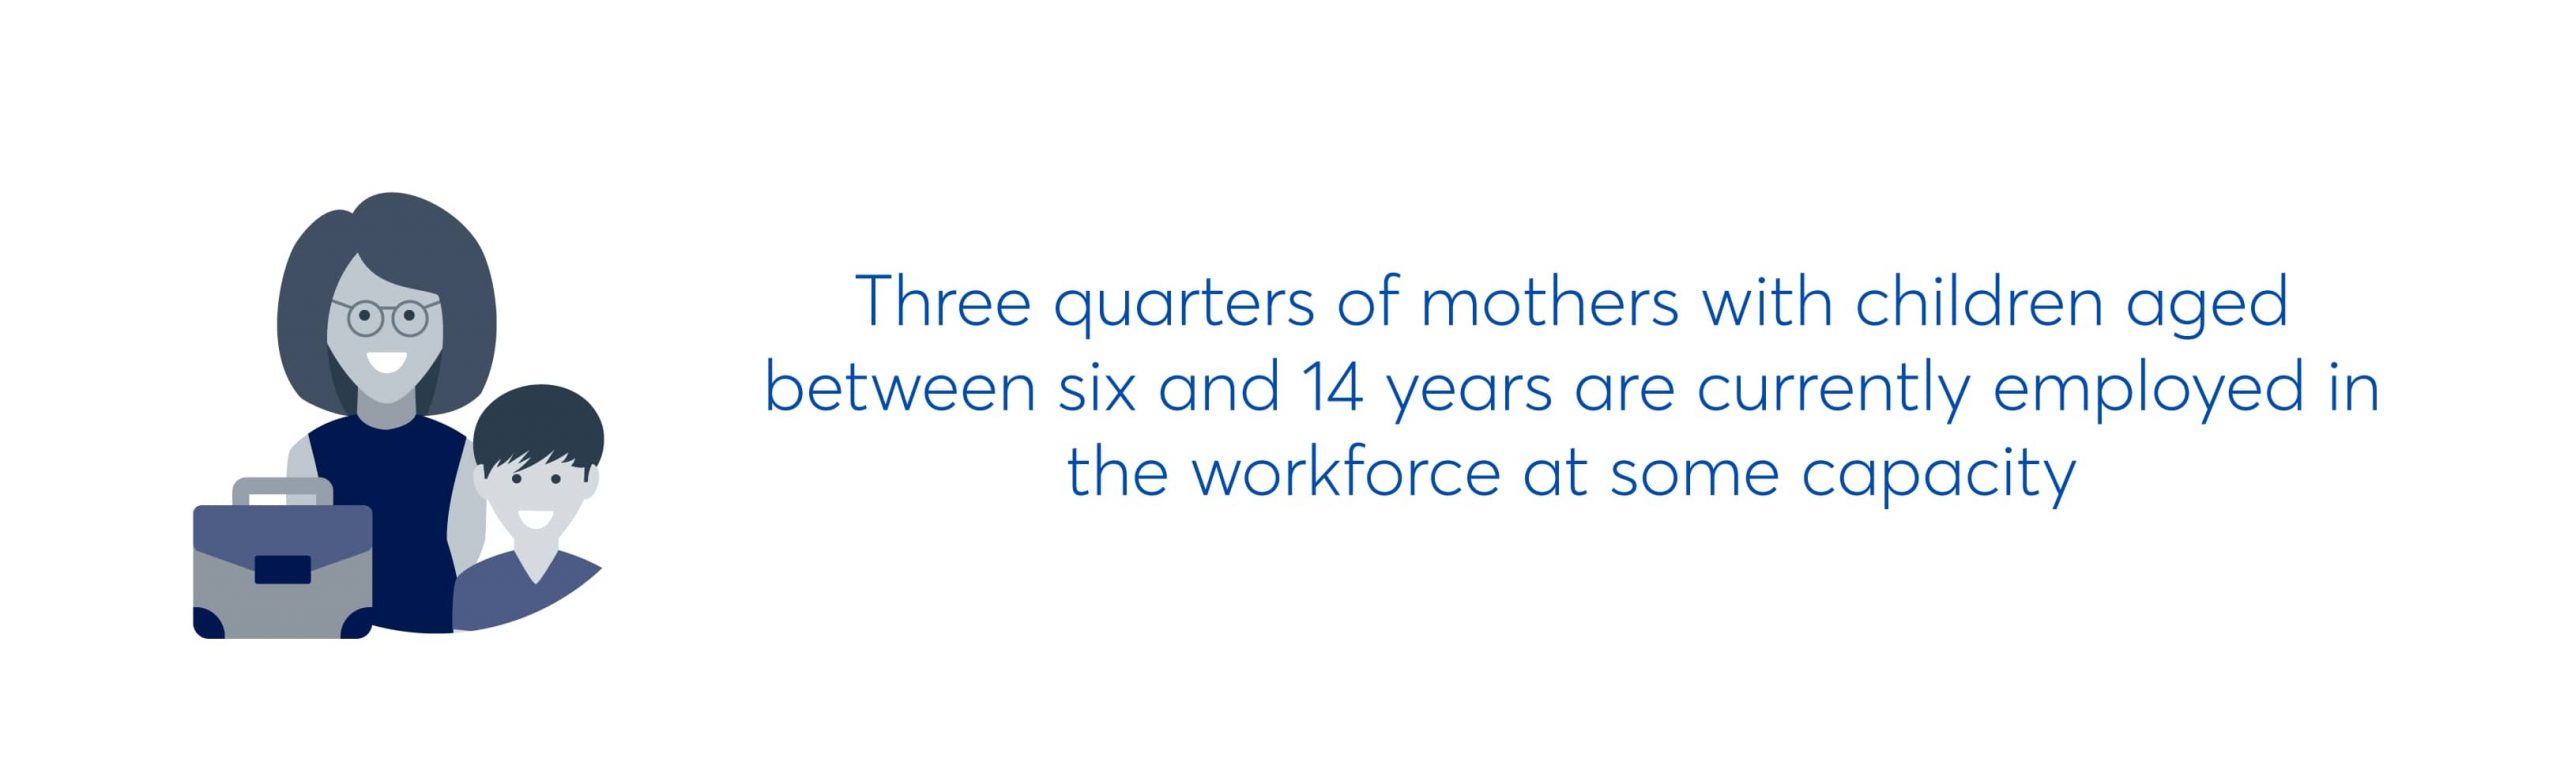 three quarters of mothers with children aged between six and 14 years are currently employed in the workforce at some capacity